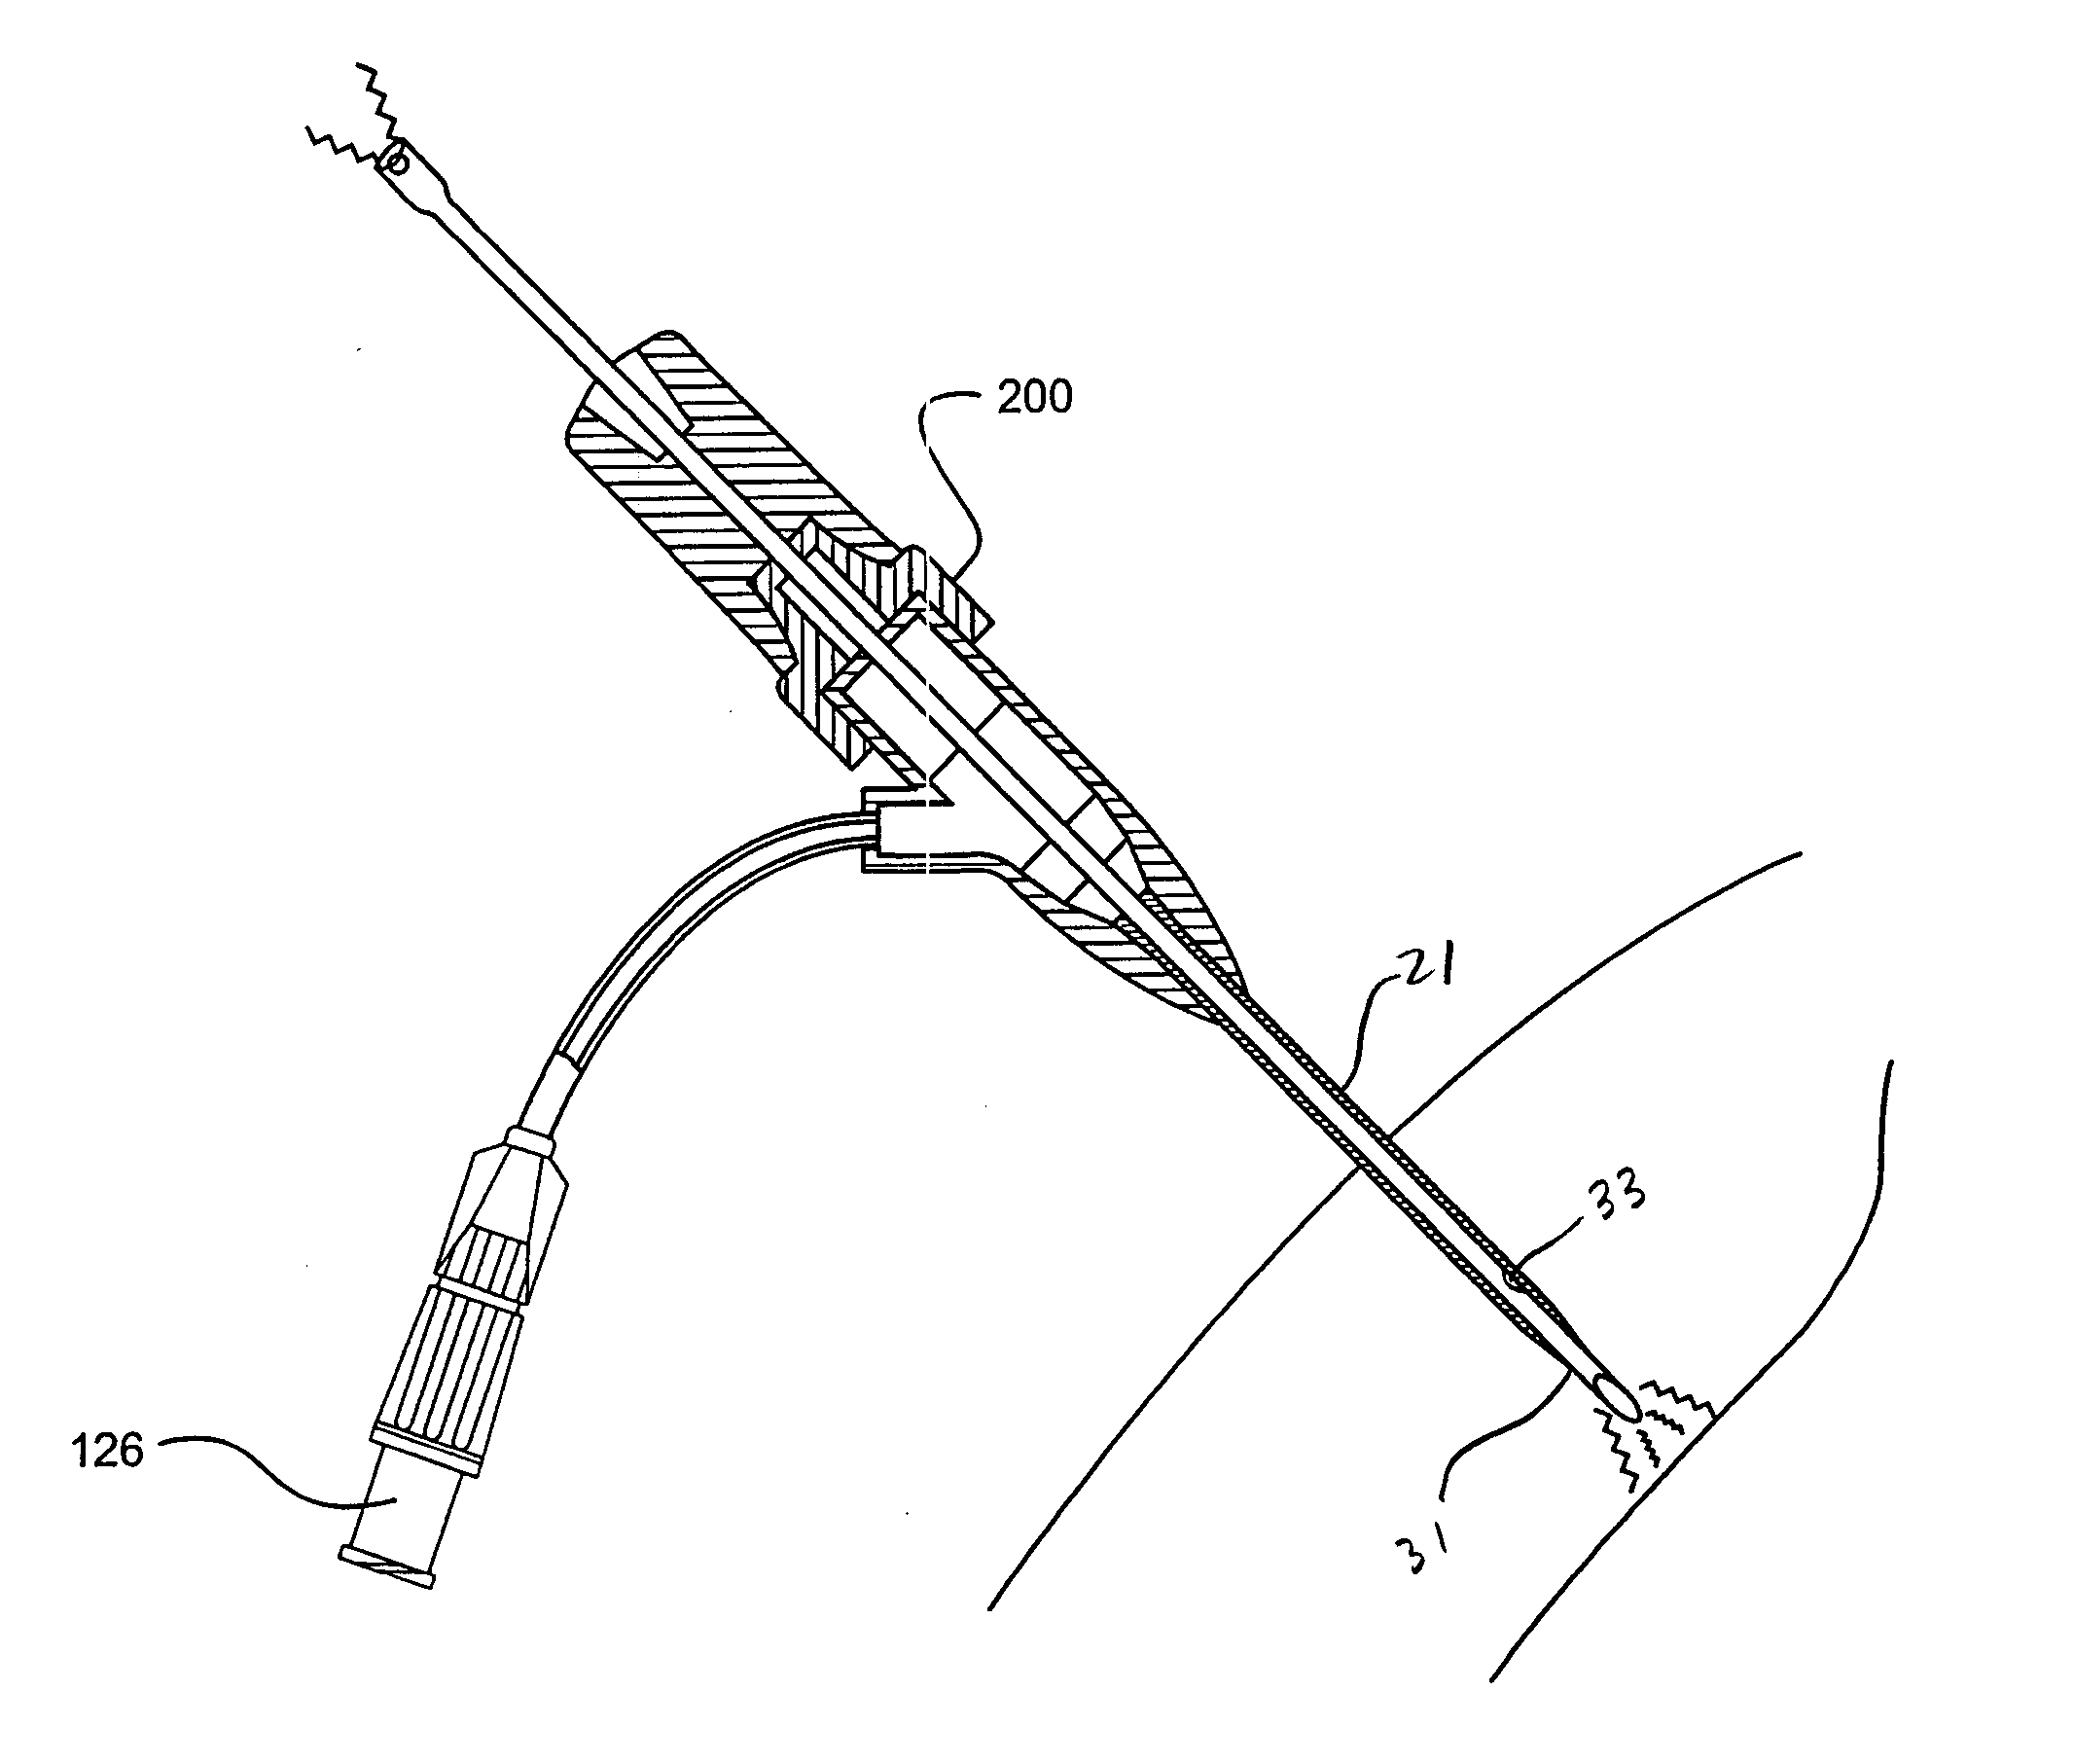 System and method of delivering local anesthesia